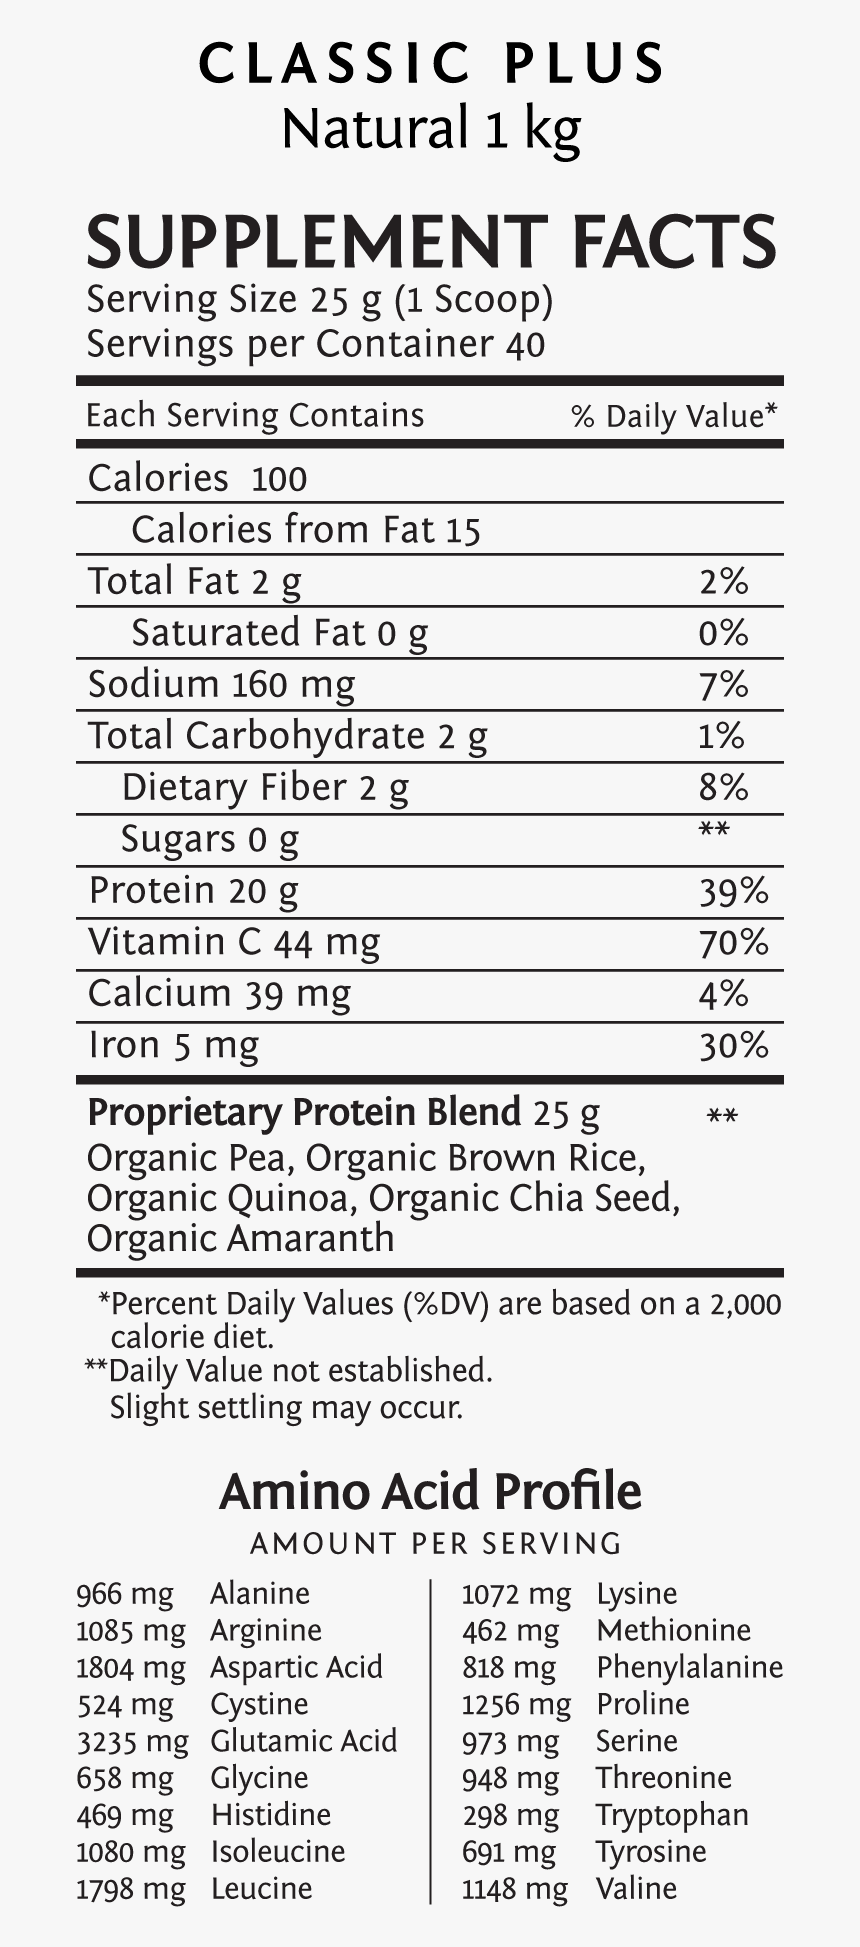 Classic Plus Protein Ingredients - Sunwarrior Natural Protein Ingredients, HD Png Download, Free Download